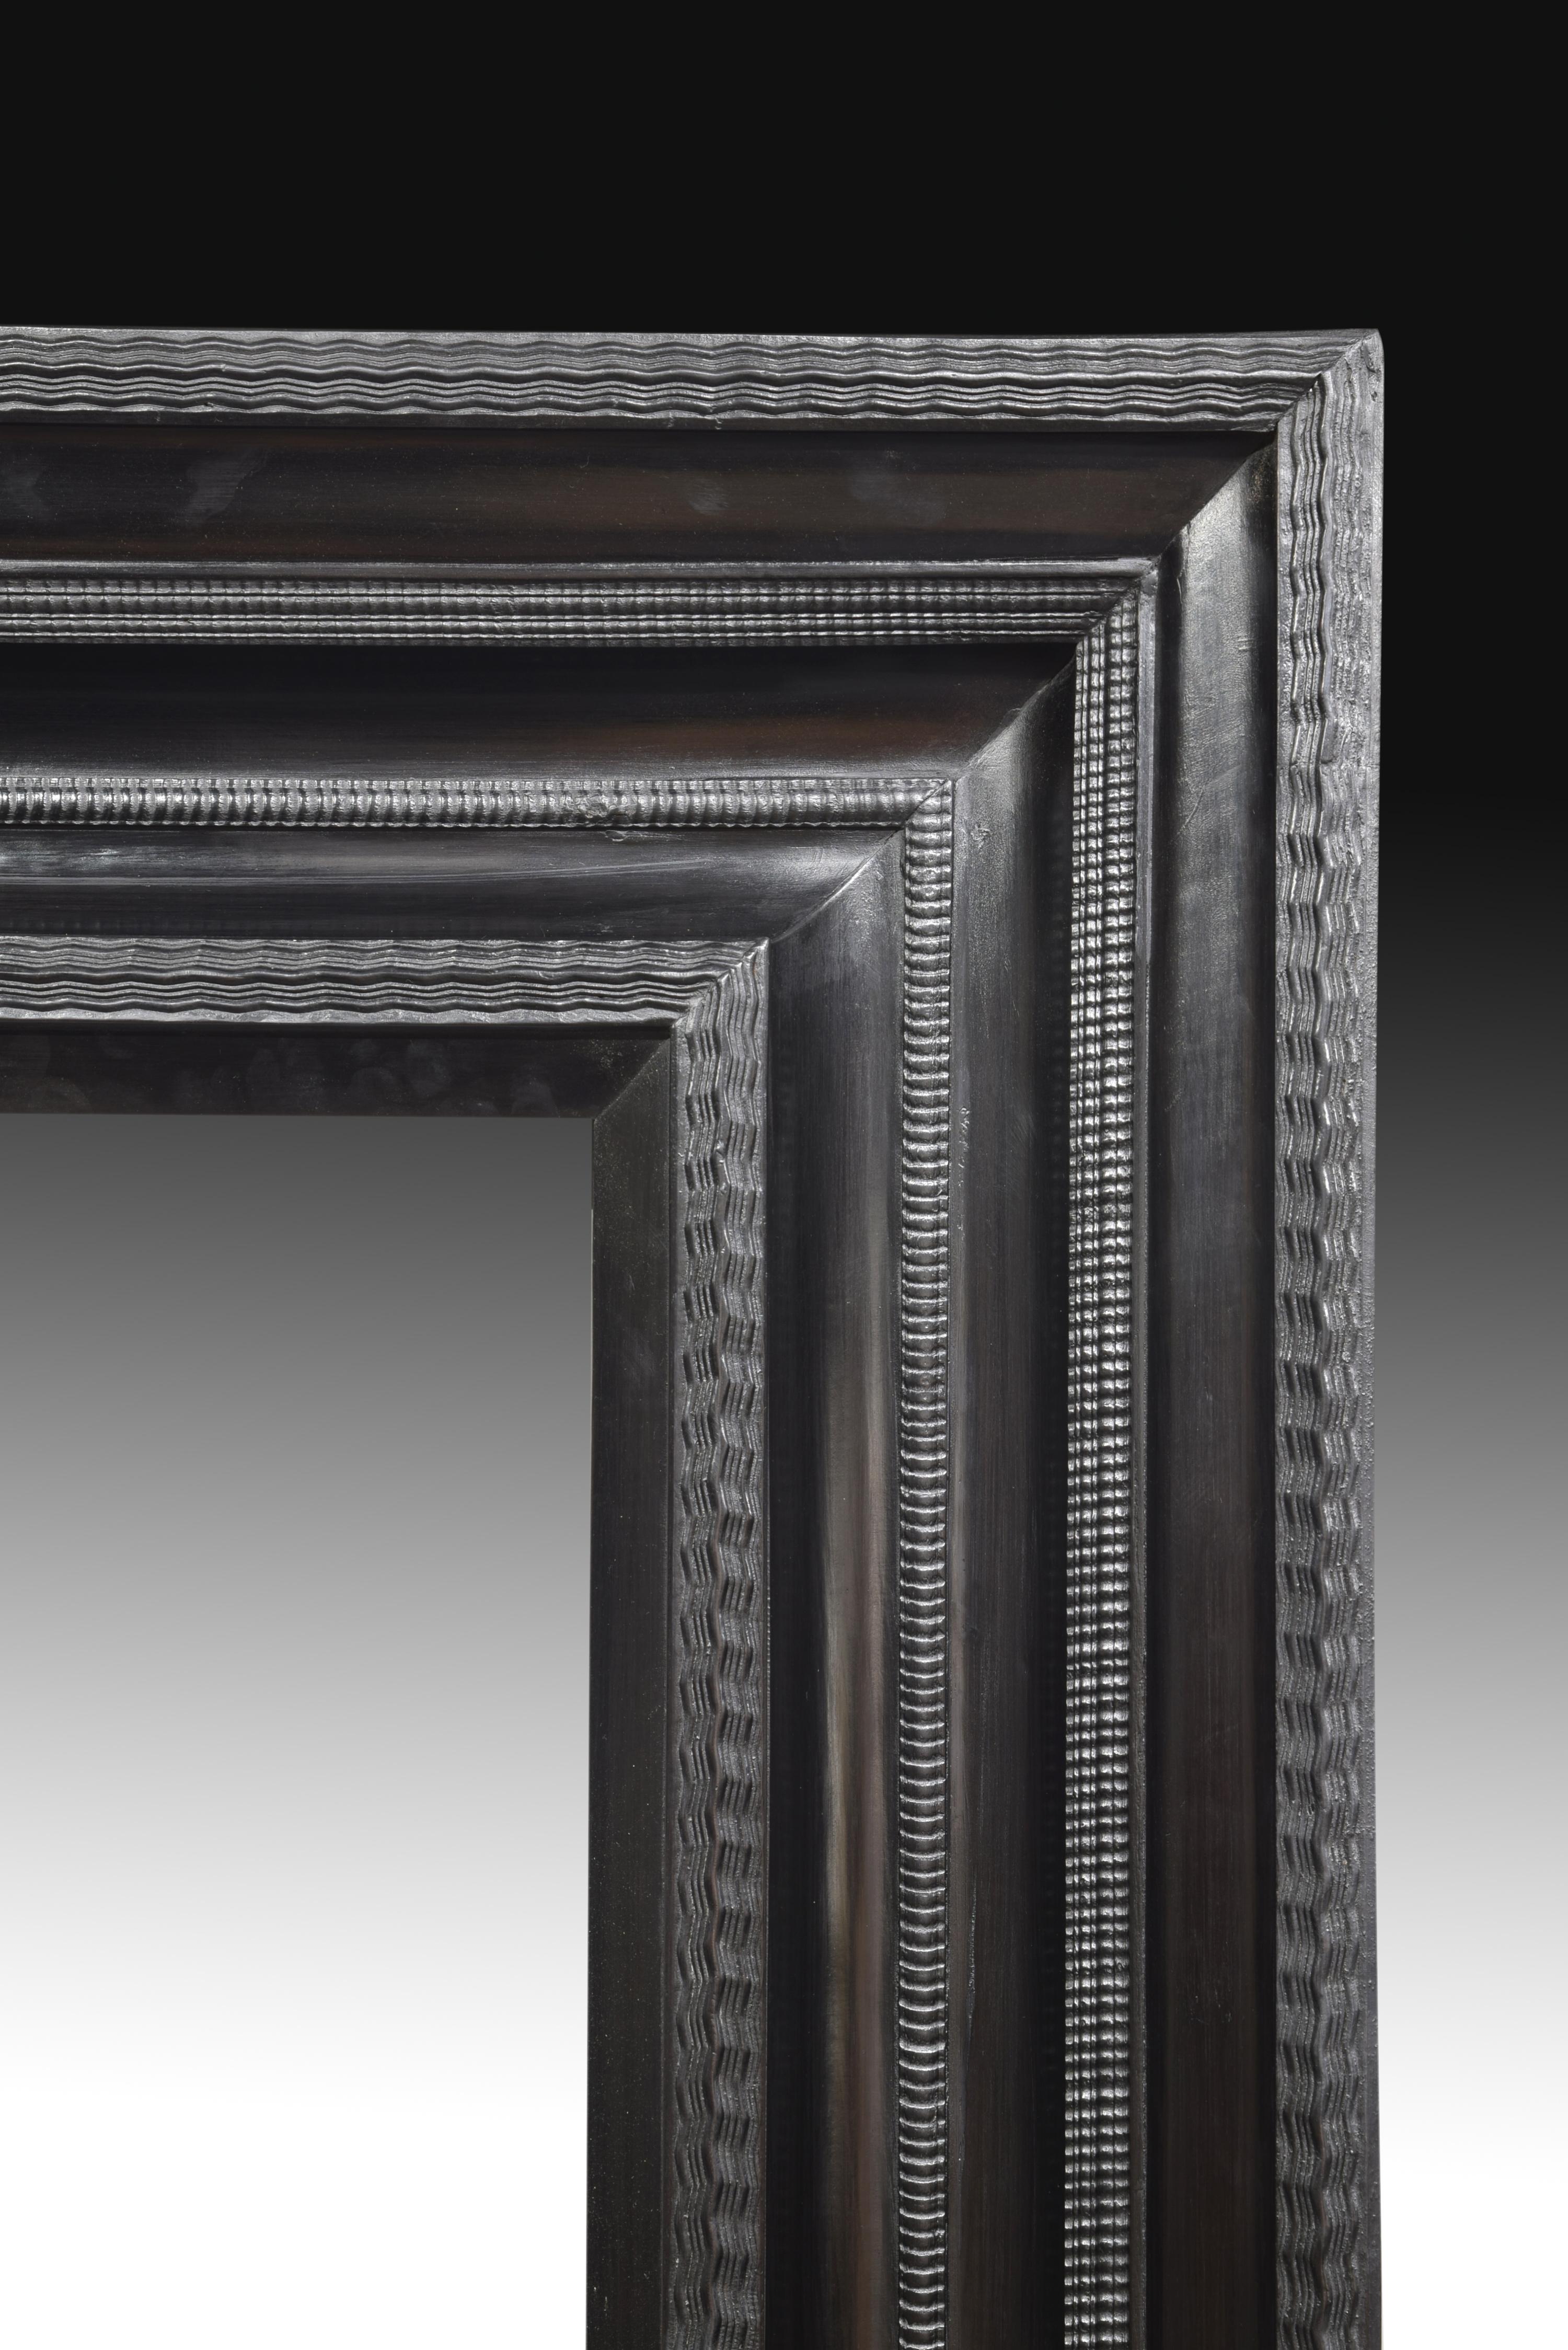 Framework. Ebonized wood, metal. Holland, 17th century.
Slightly rectangular frame with metal pieces on the back to be placed on the wall and a fine decoration carved on the wood strips. With the ebonized finish, the front of the piece is presented